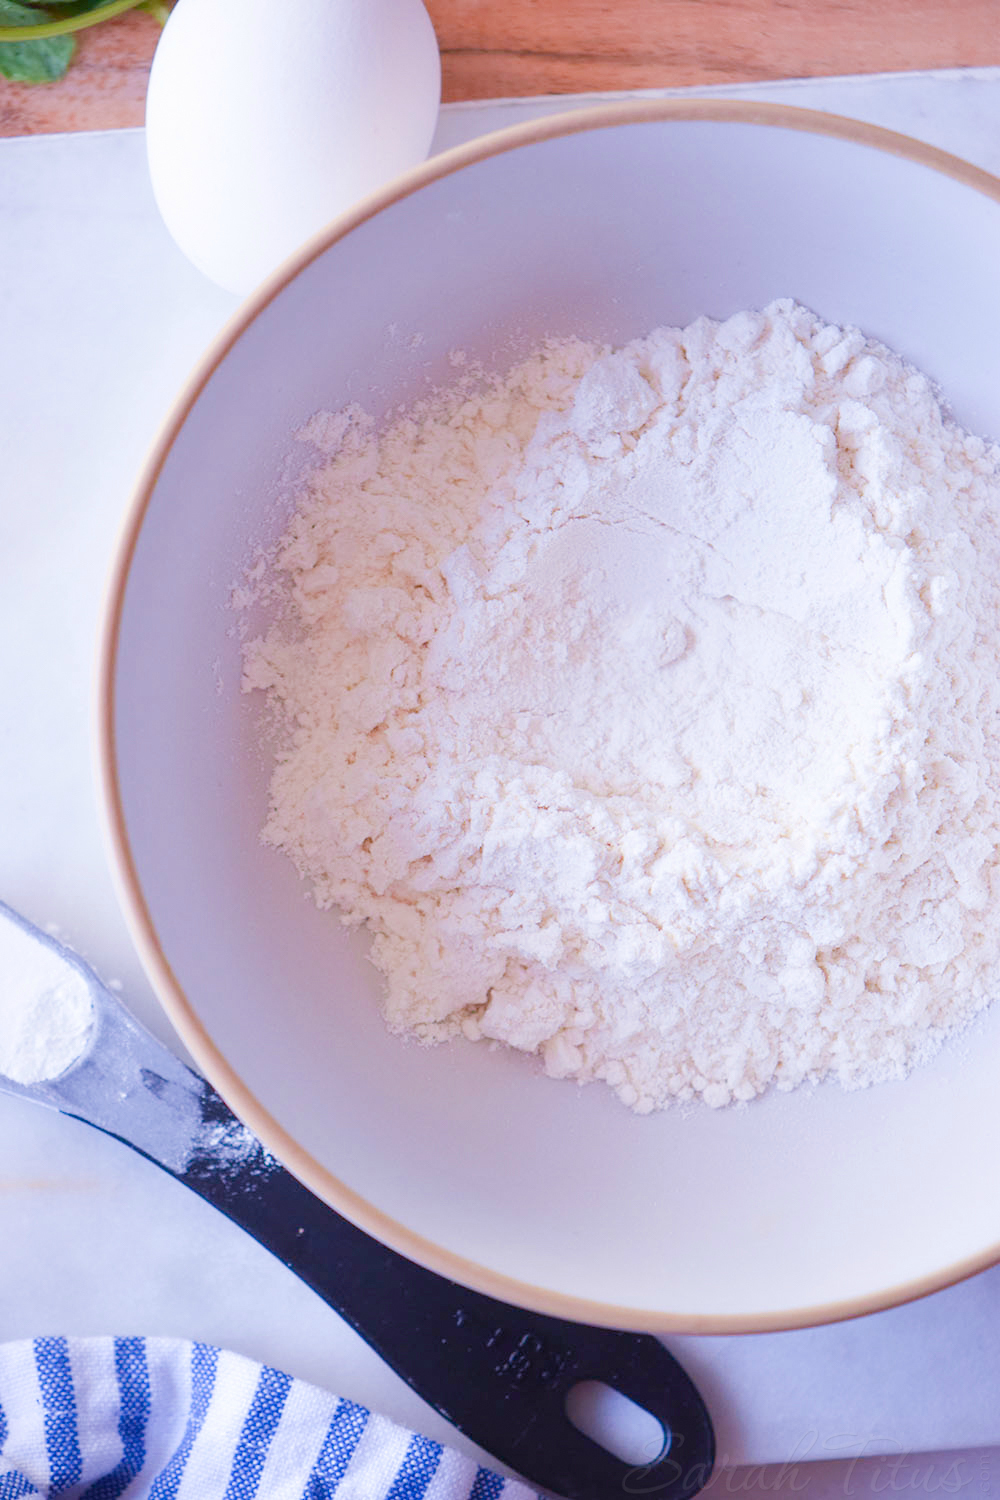 Bowl of flour with an egg and measuring spoon off the side in preparation for making pizza waffles